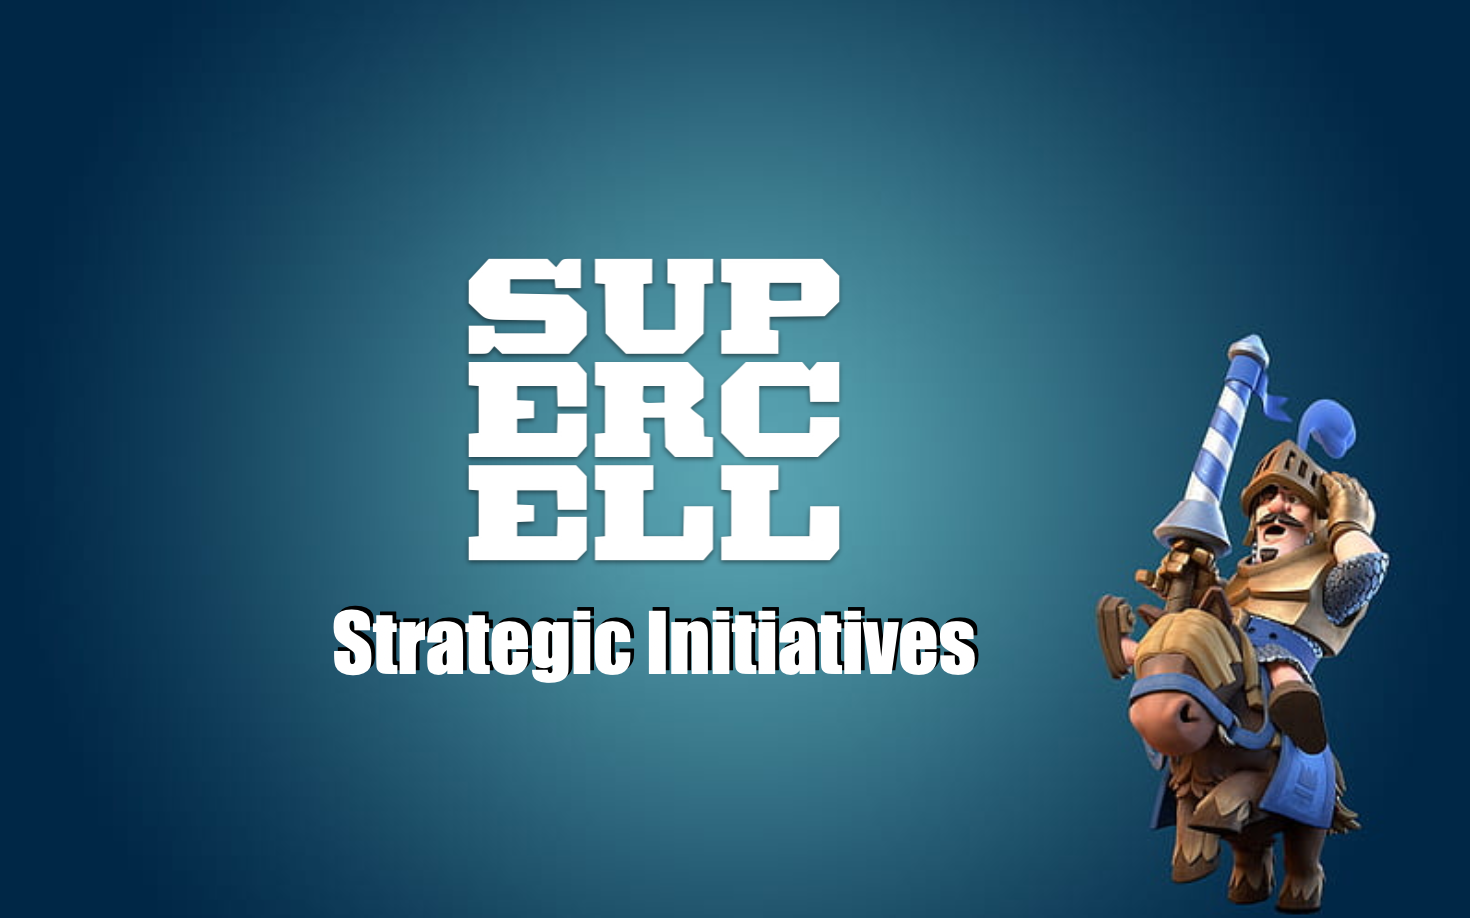 Brawl Stars Esports continues growth curve - Supercell reveals 2023 plans